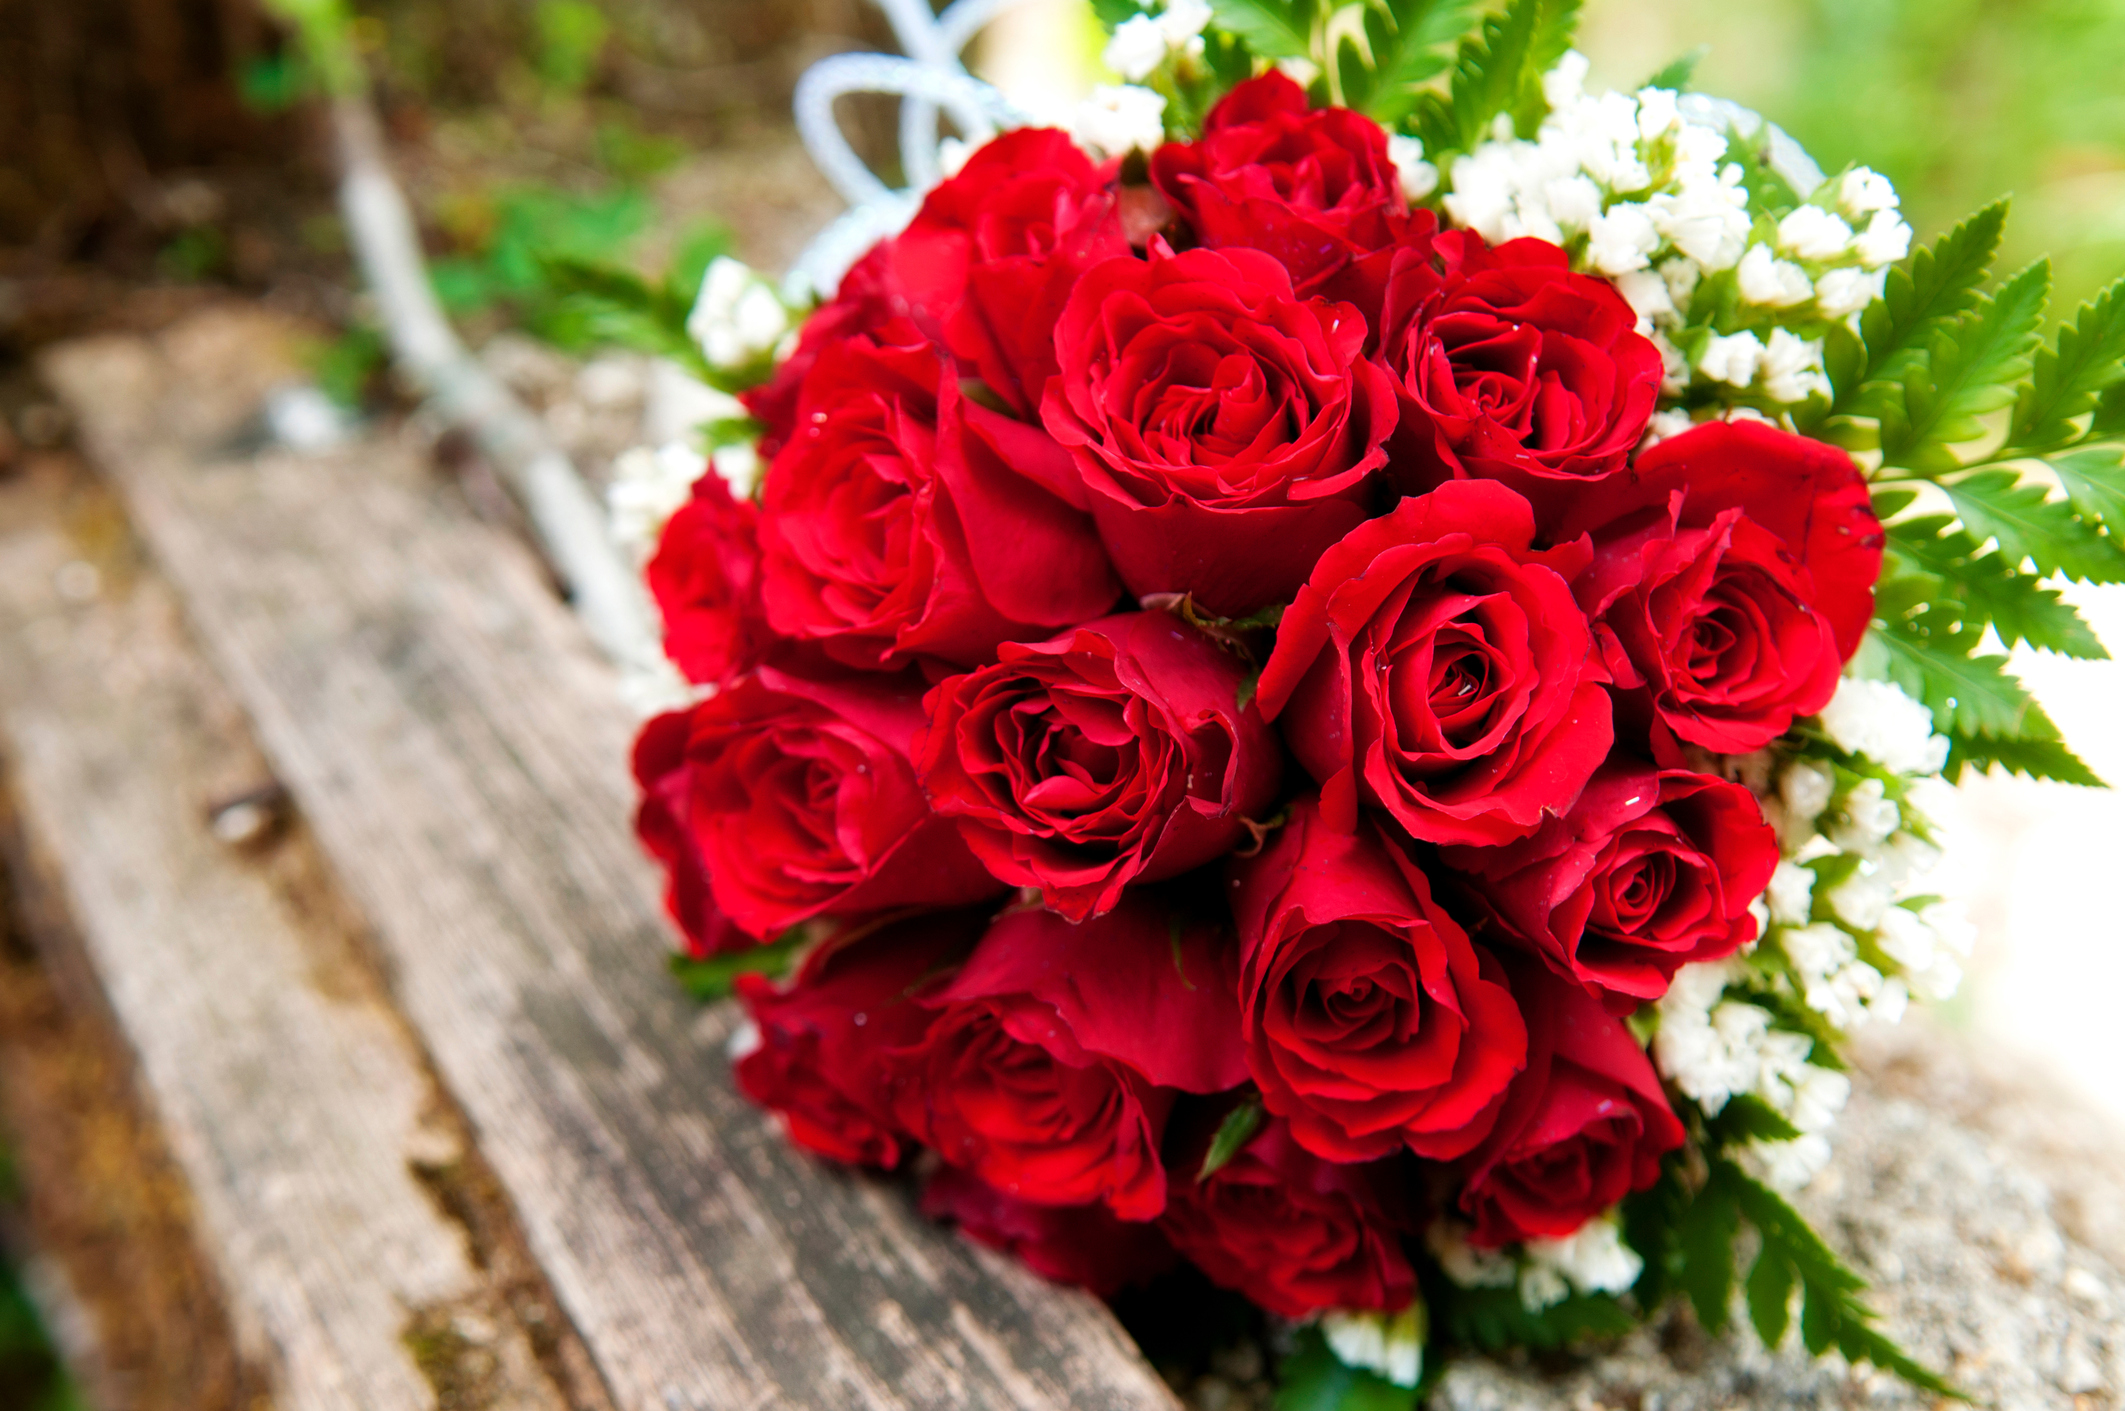 PHOTO: A bouquet of red roses lays on a wooden picnic bench in this stock image. 